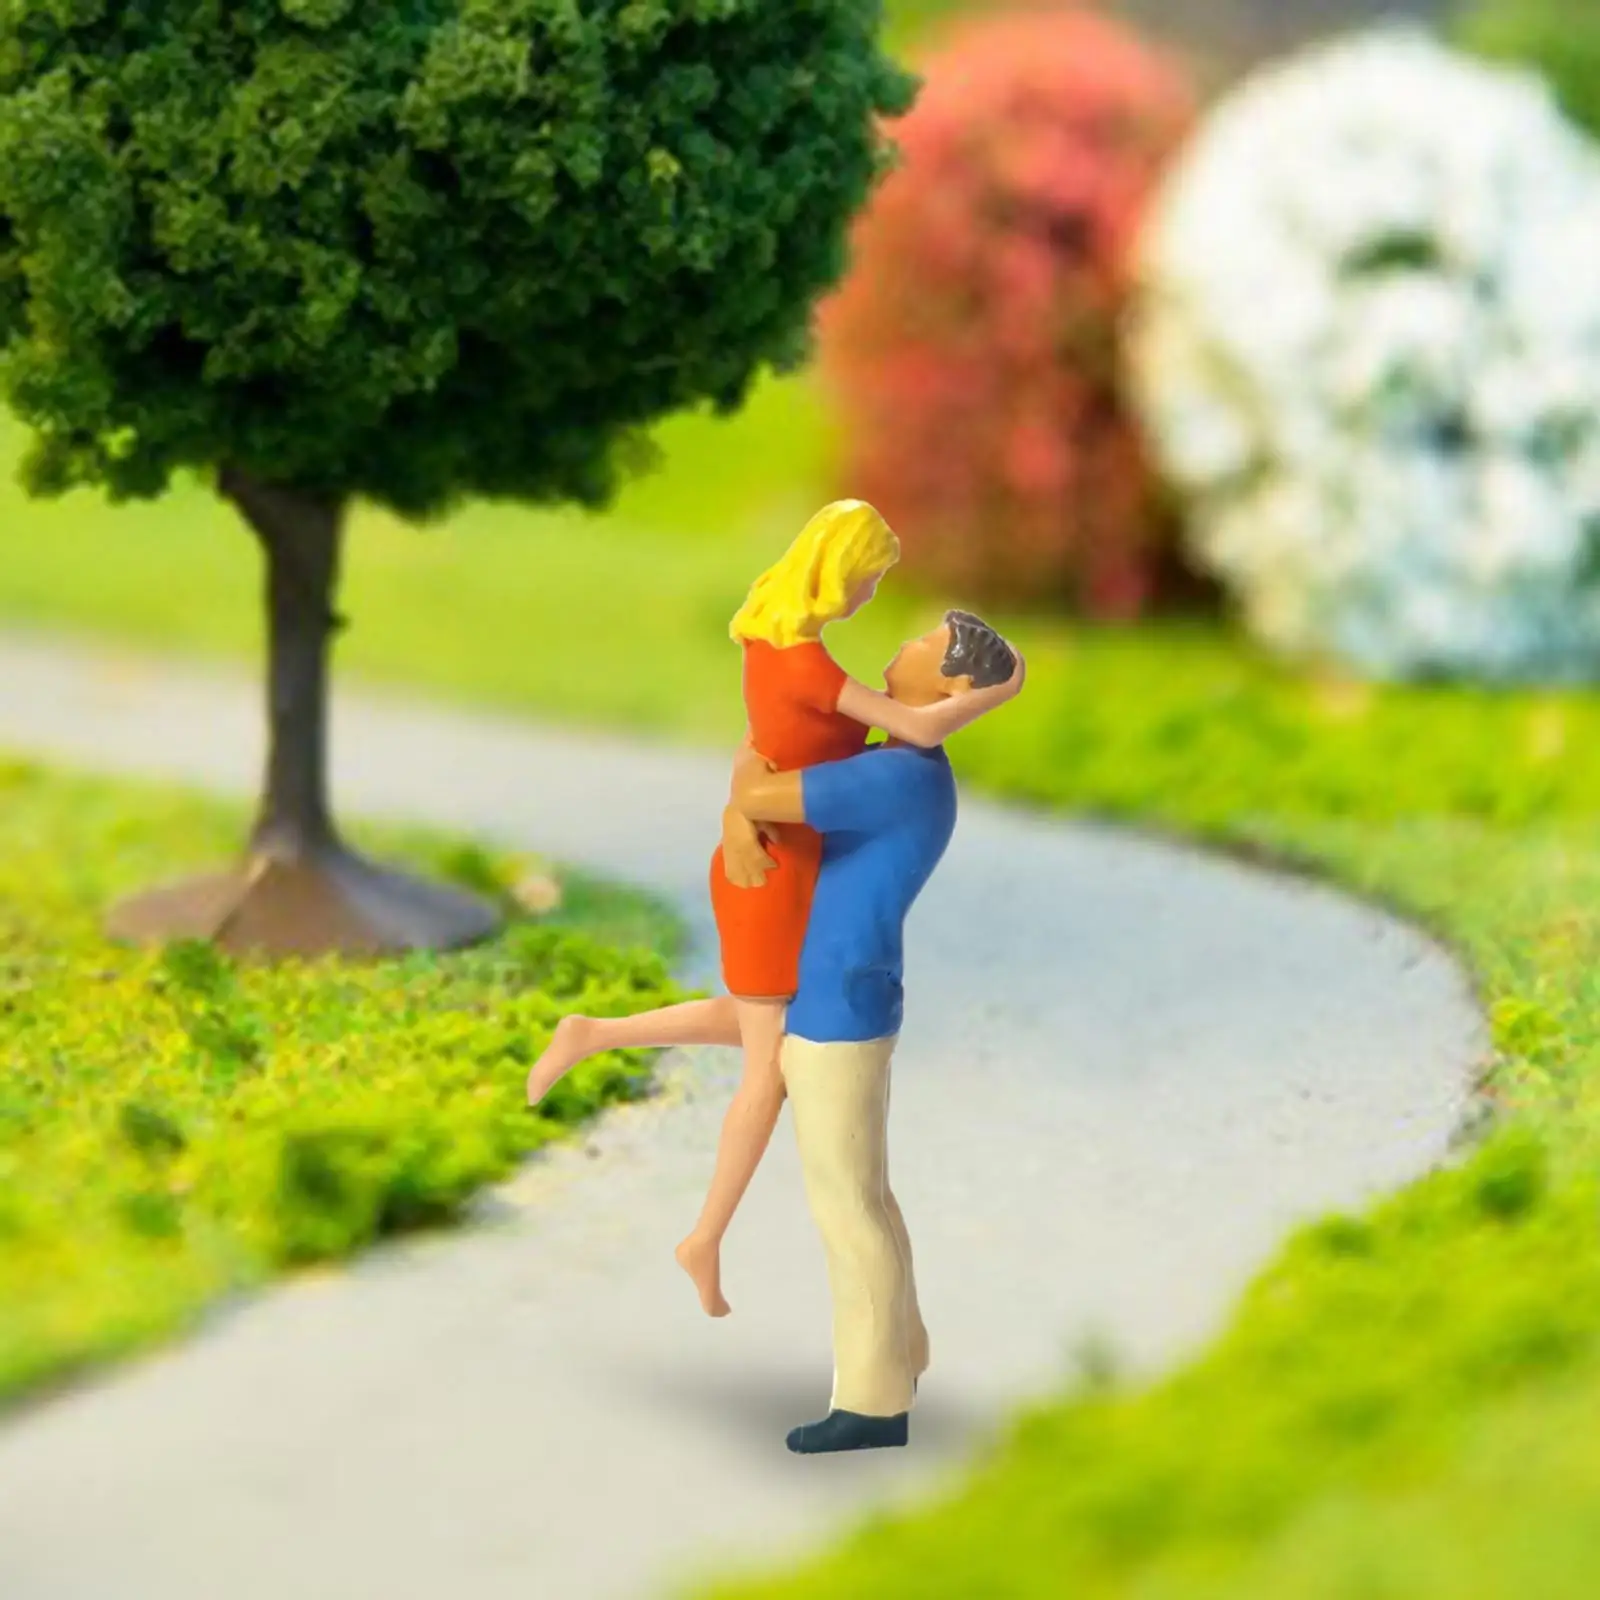 1:64 Diorama Street Character Figure Collectibles Model Trains People Figures for DIY Scene Photography Props Diorama Decoration